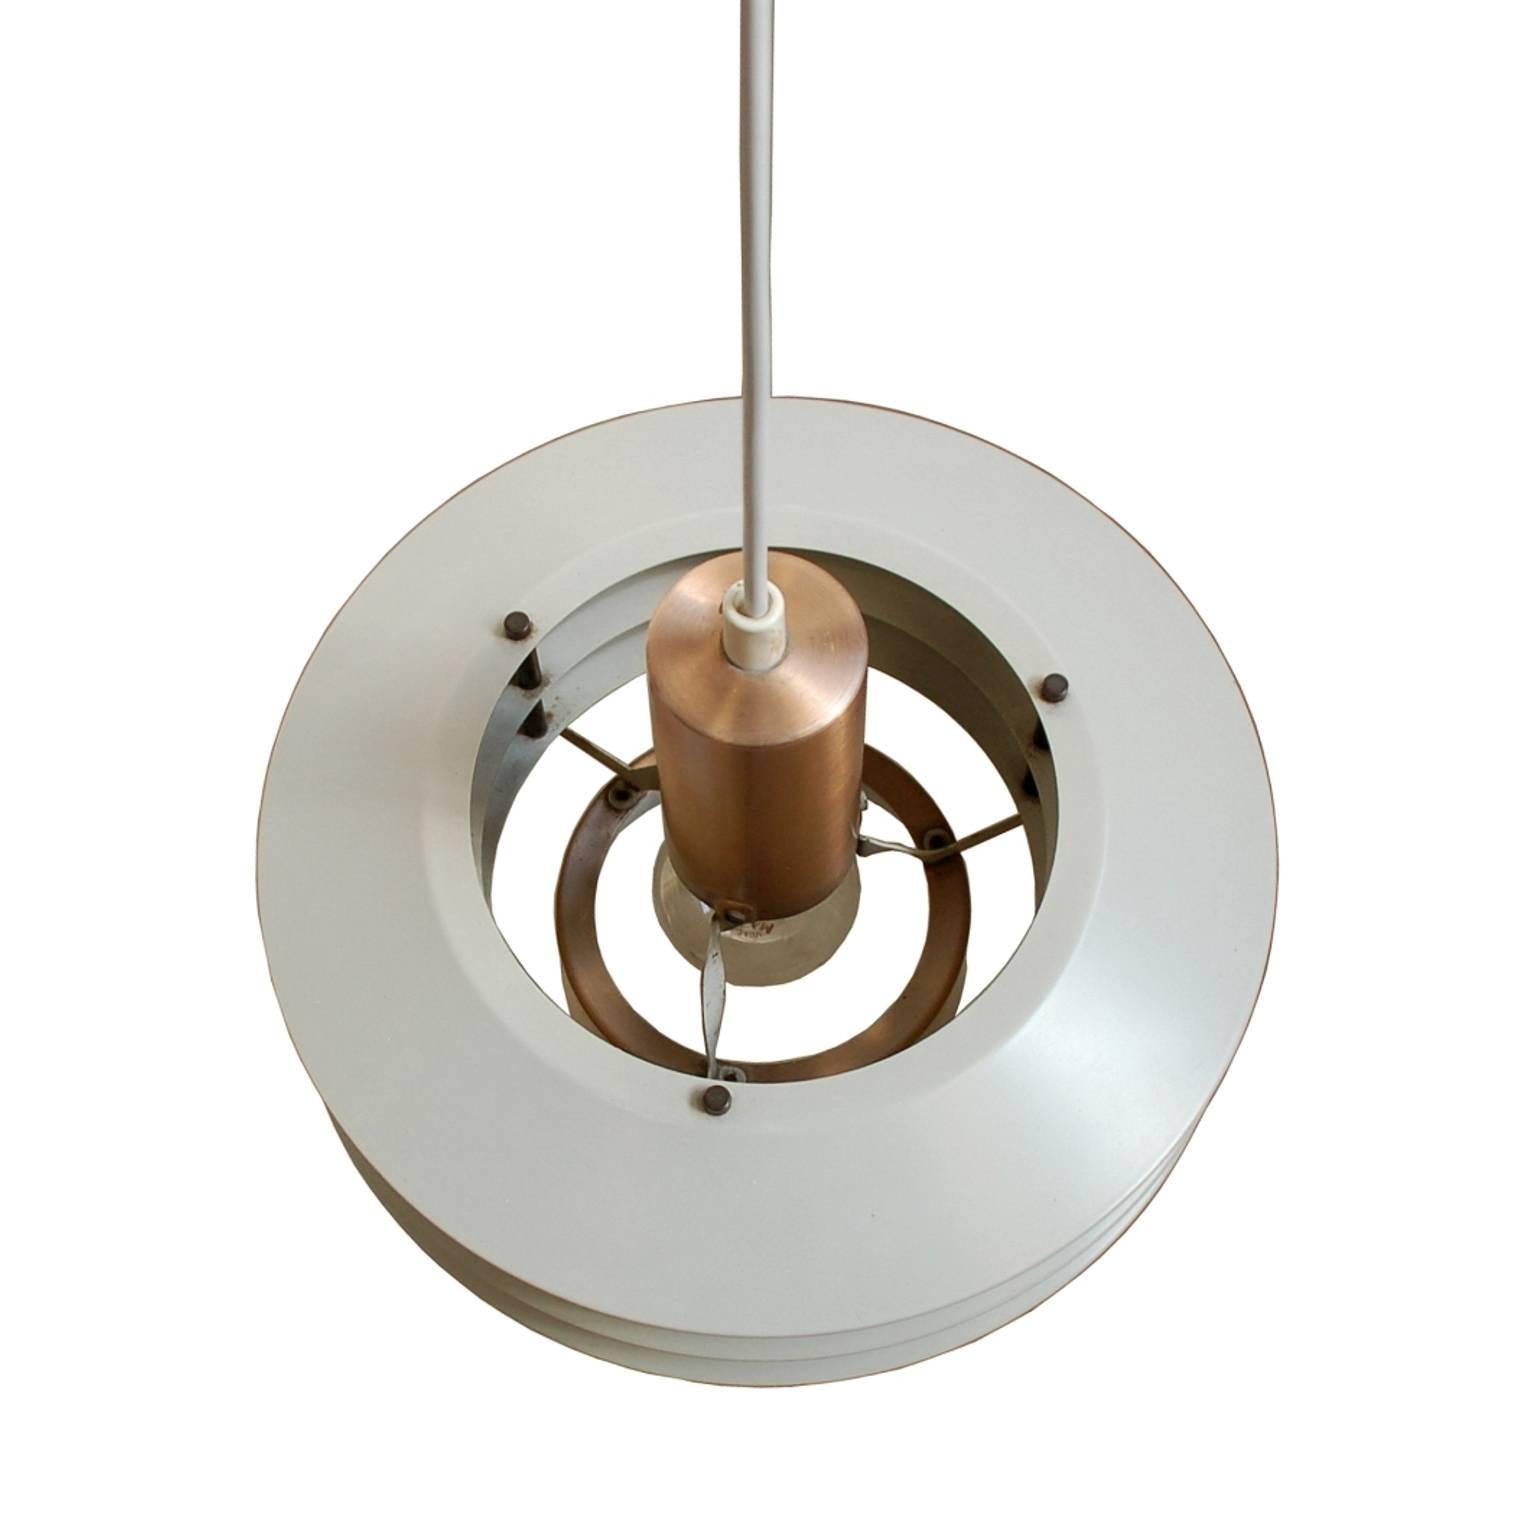 Medium sized pendant light in an excellent combination of copper and white lacquered metal. The lamp has a very bright look, even when switched off. Overall it remains in a good vintage condition with brand new wiring and some normal traces of use.